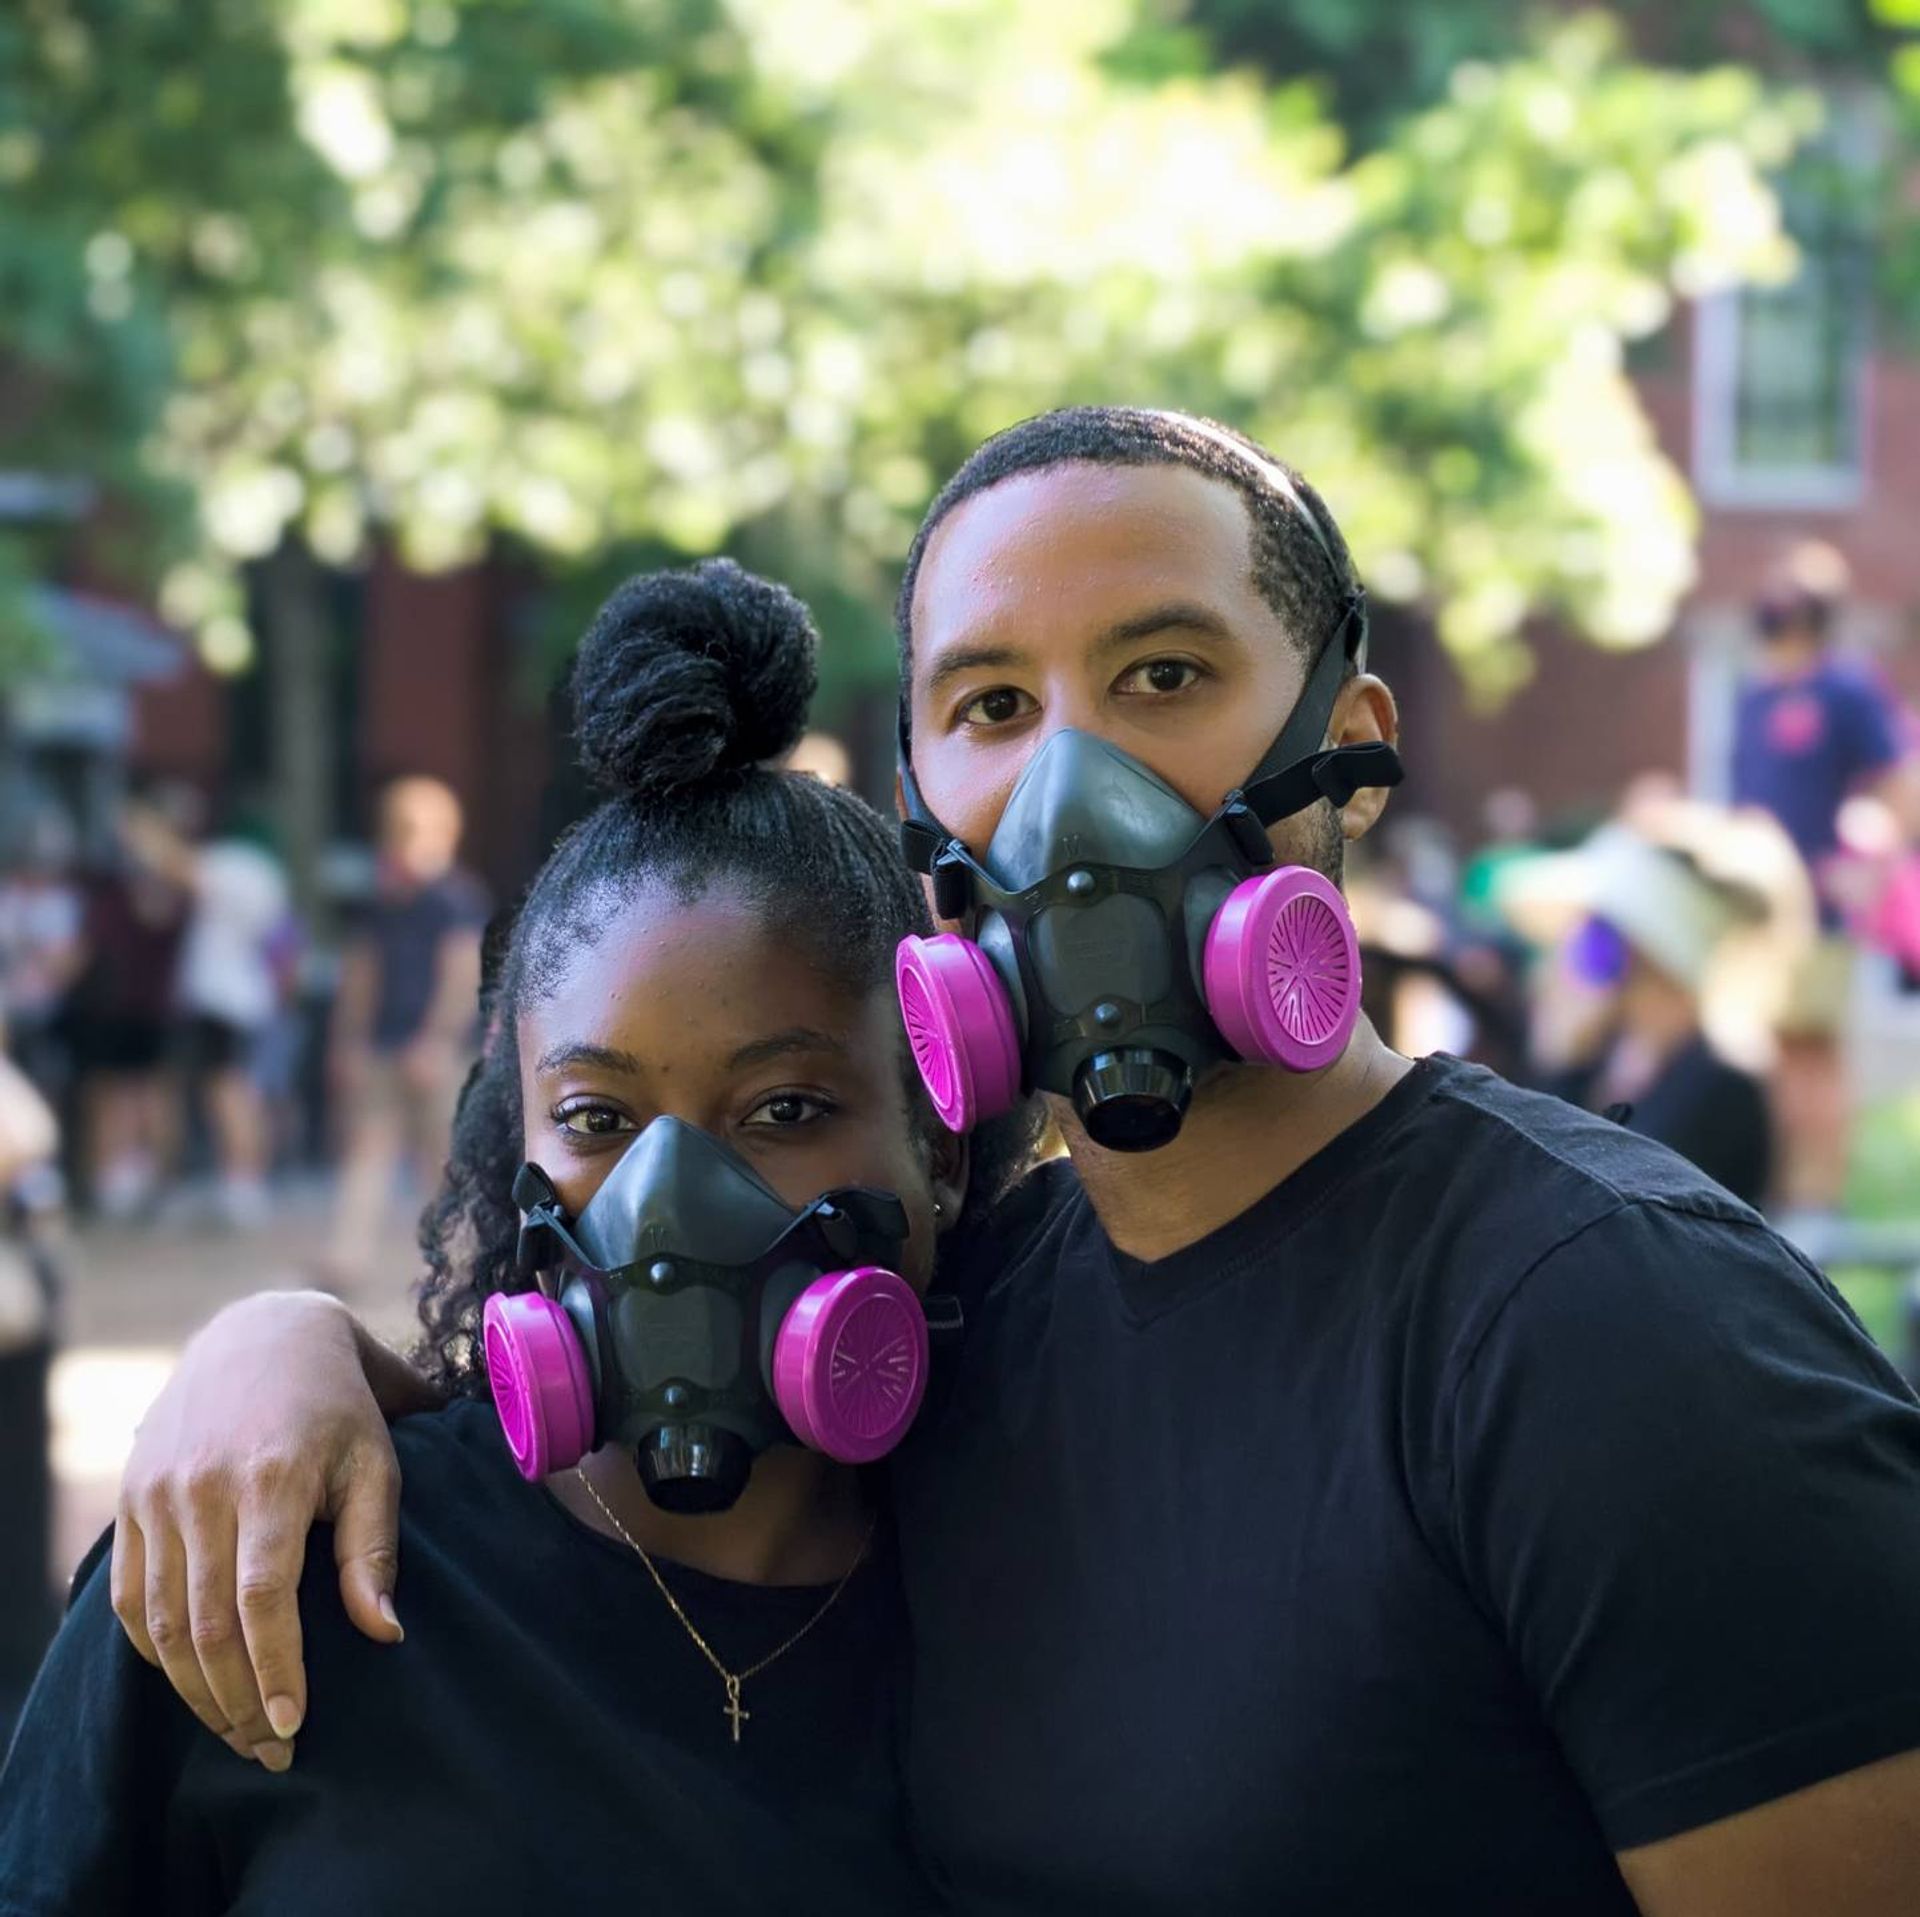 Between a global pandemic and police violence against people of color, 2020 underscored long-standing issues of racism as a public health crisis in America. Photo by Obi Onyeader via Unsplash.